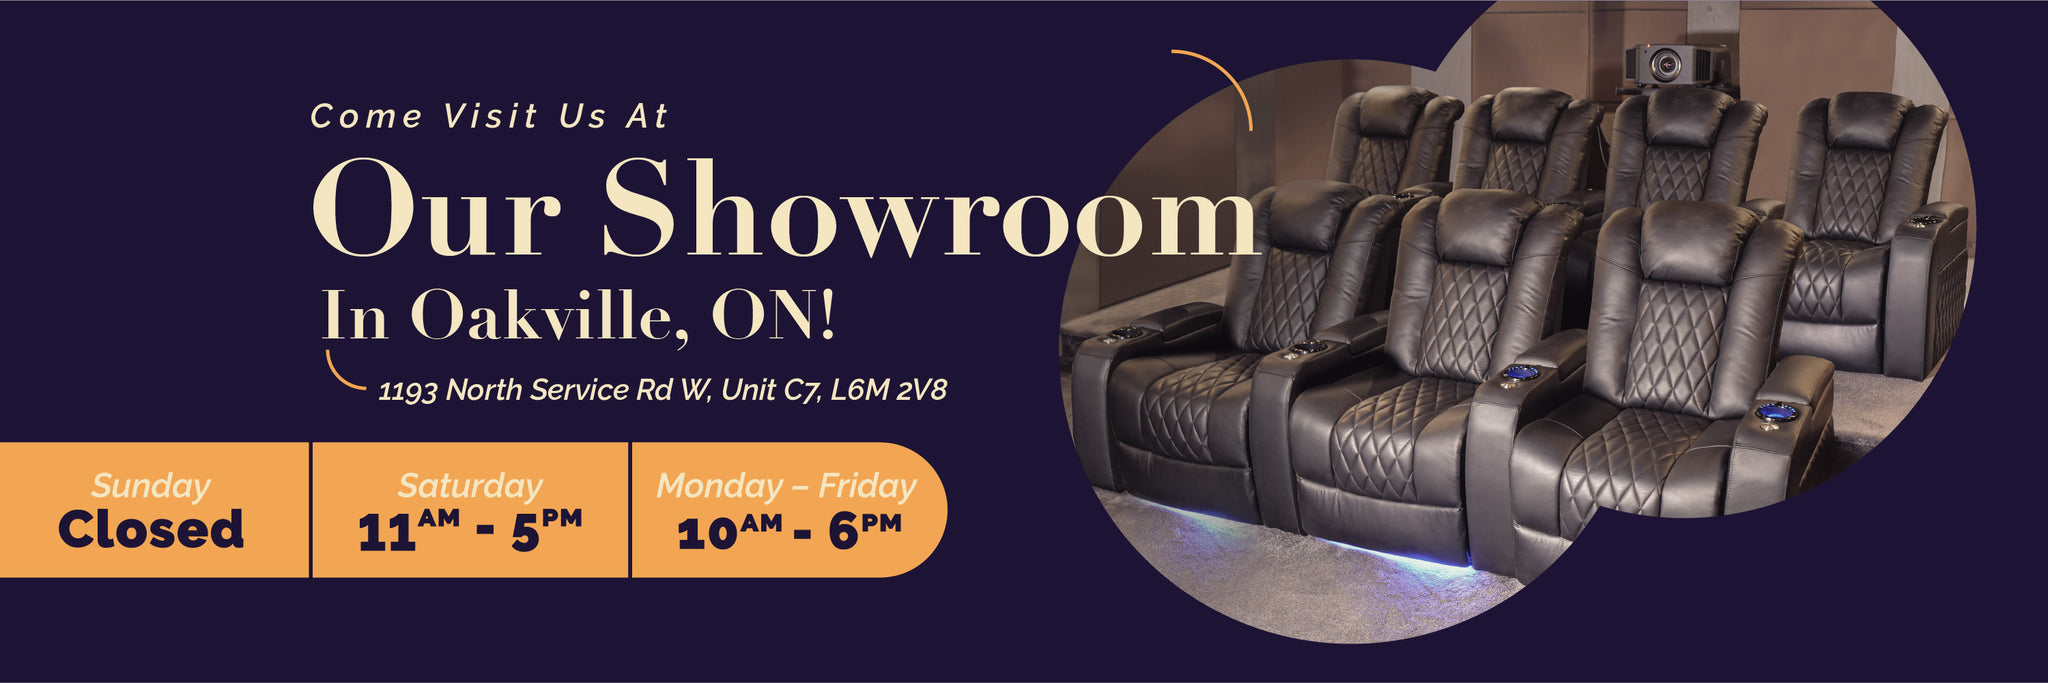 Visit our showroom in Oakville, Ontario. Address: 1193 North Service Rd W, Unit C7, L6M 2V8. Operating hours are: Monday to Friday 10AM - 6PM, Saturday 11AM - 5PM, and closed on Sunday 